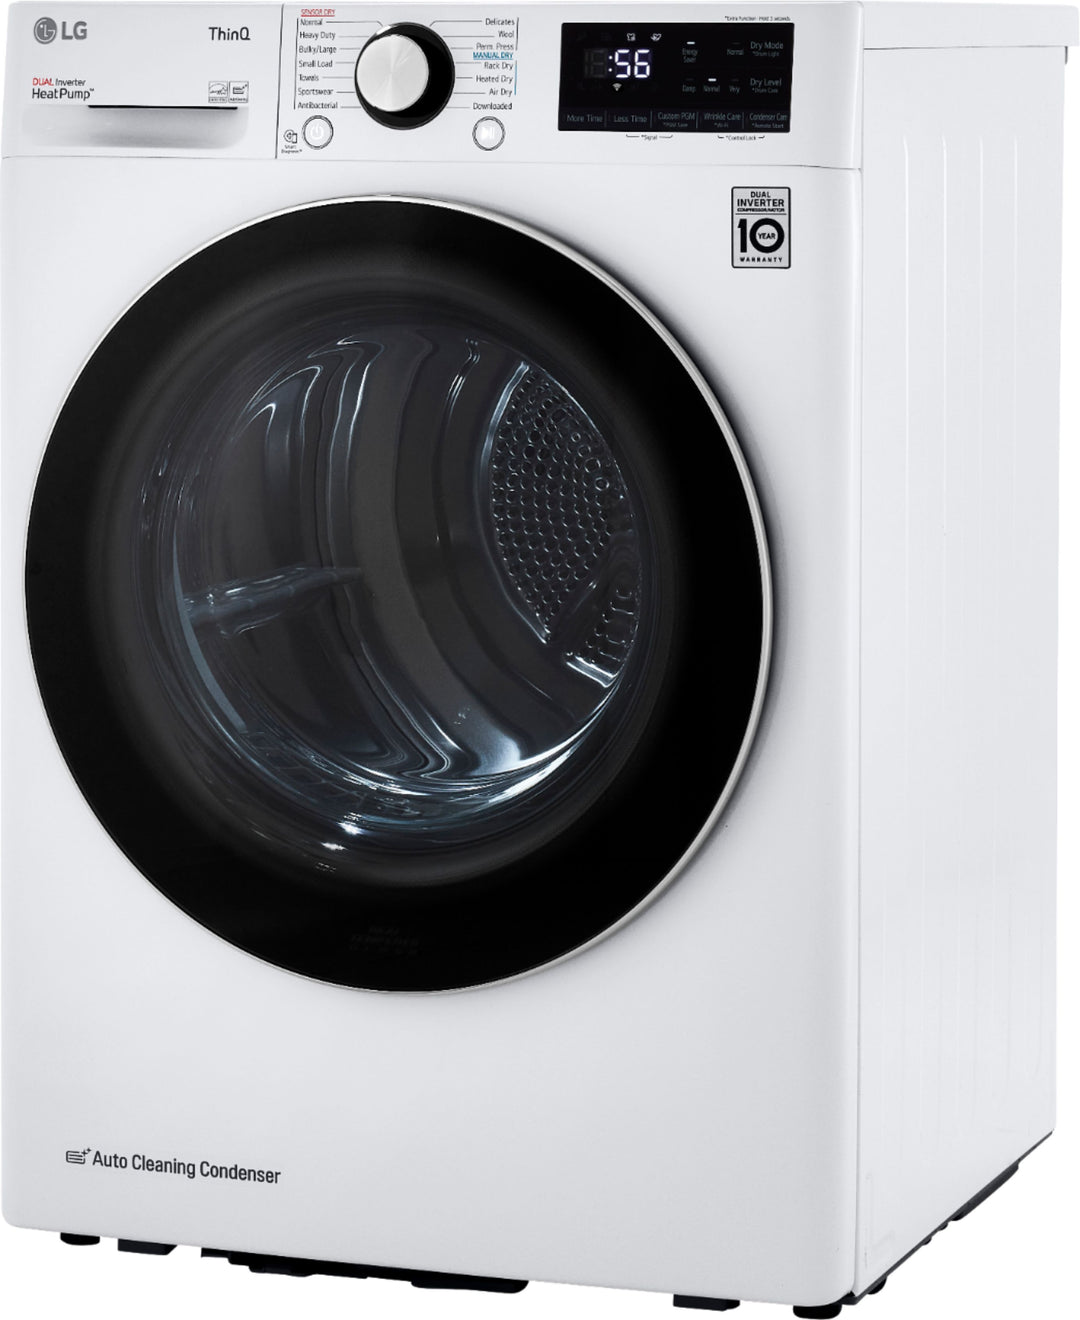 LG - 4.2 cu ft Stackable Electric Dryer with Dual Inverter HeatPump - White_15